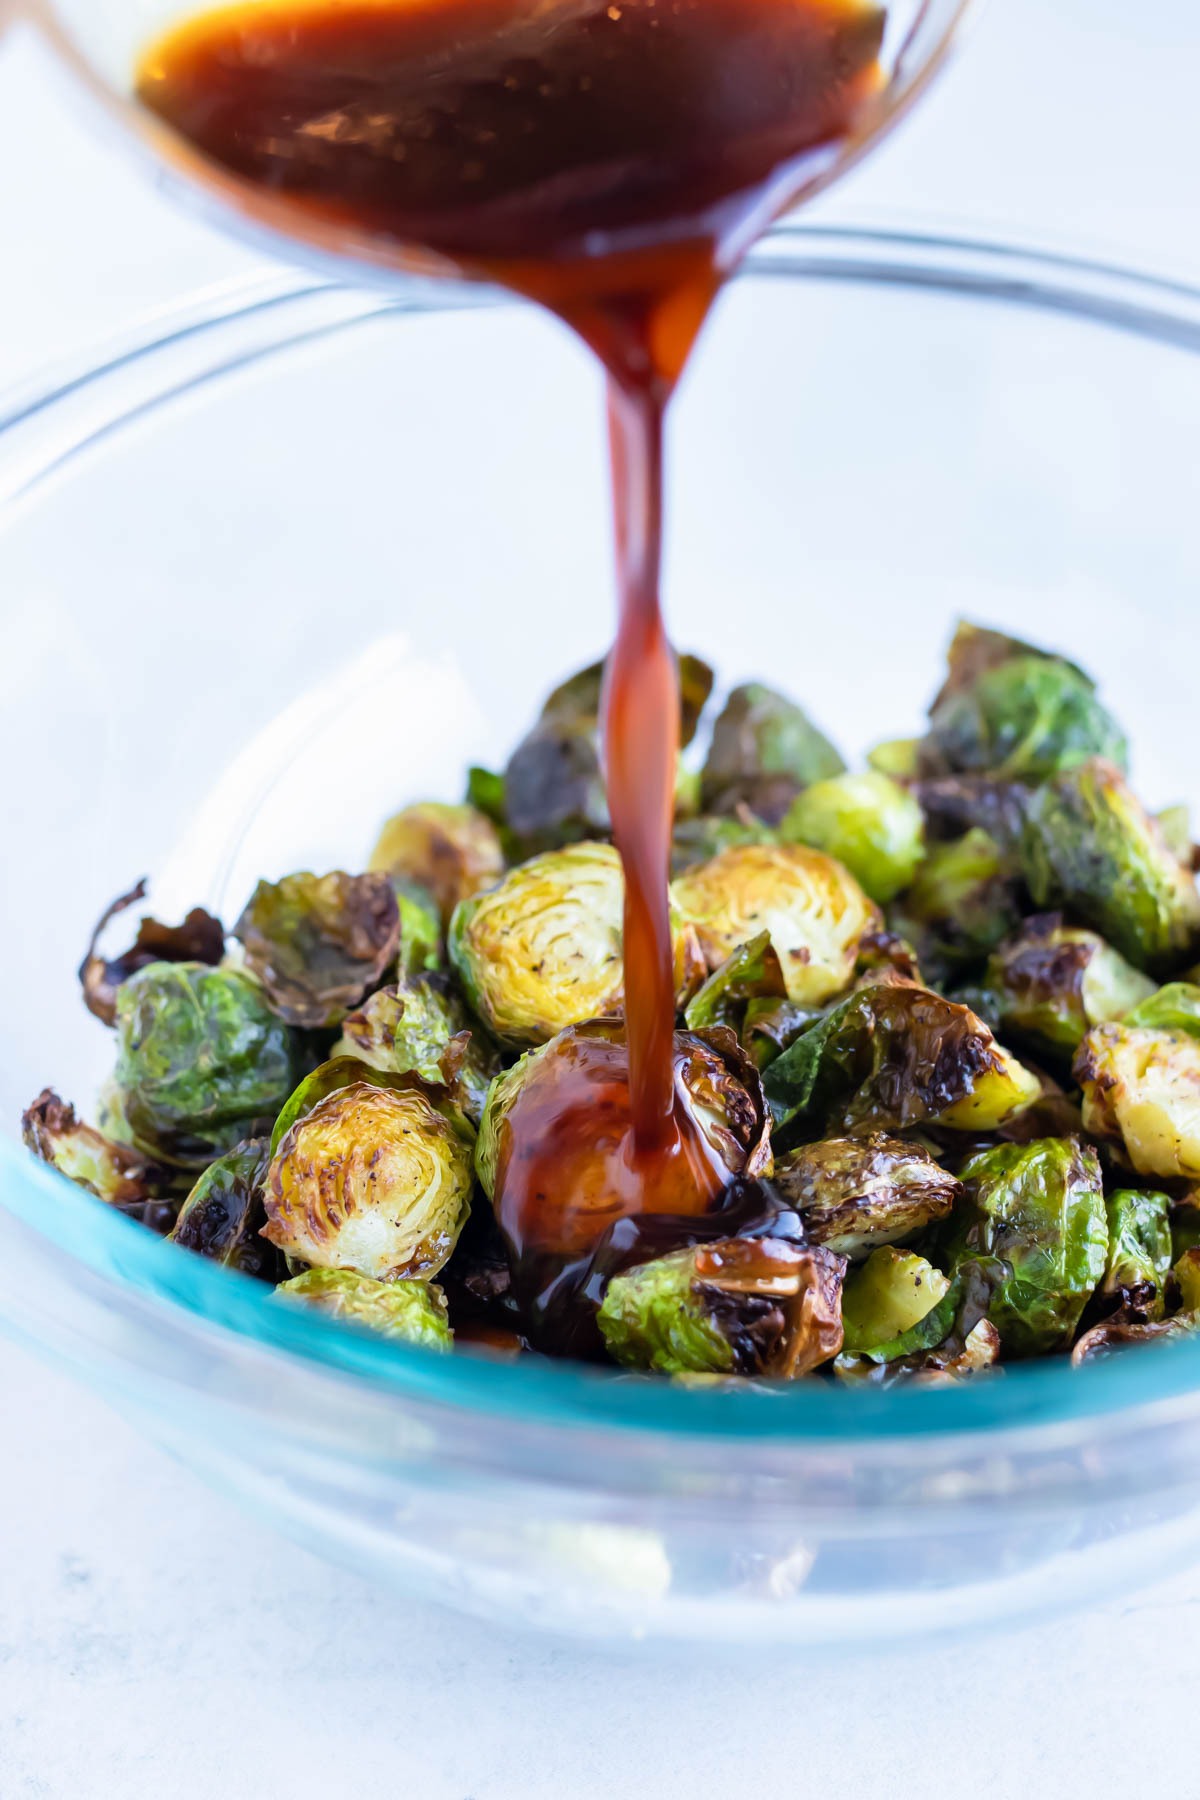 Crispy air fryer brussels sprouts are drizzled with Asian Honey Sriracha sauce.